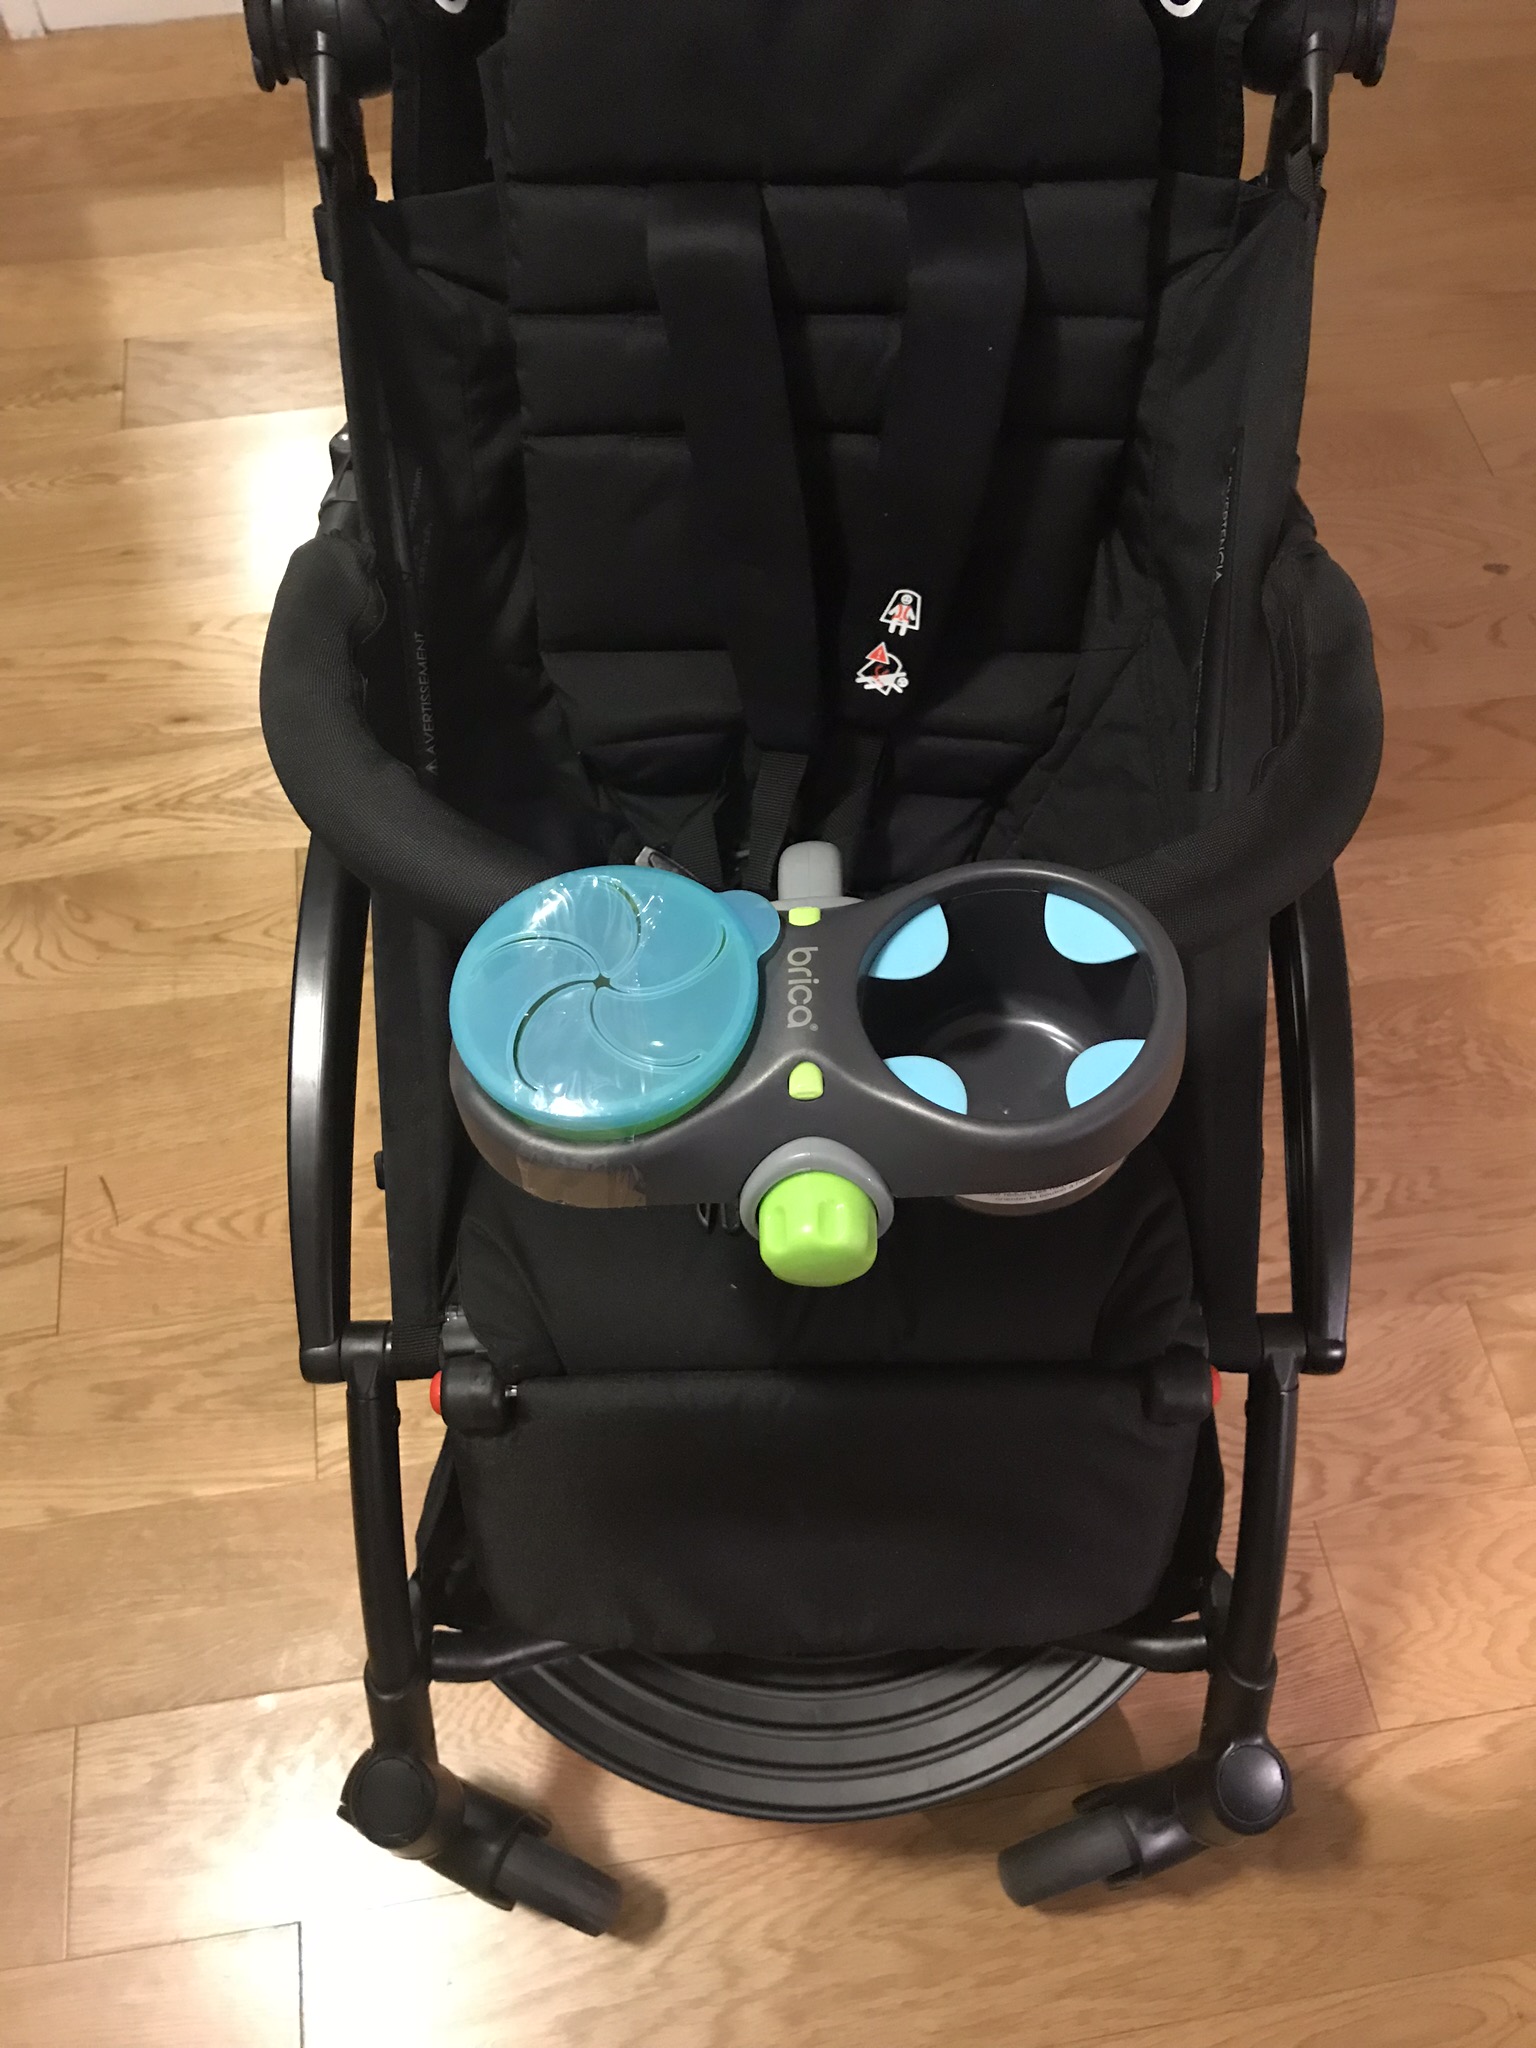 stroller with food tray